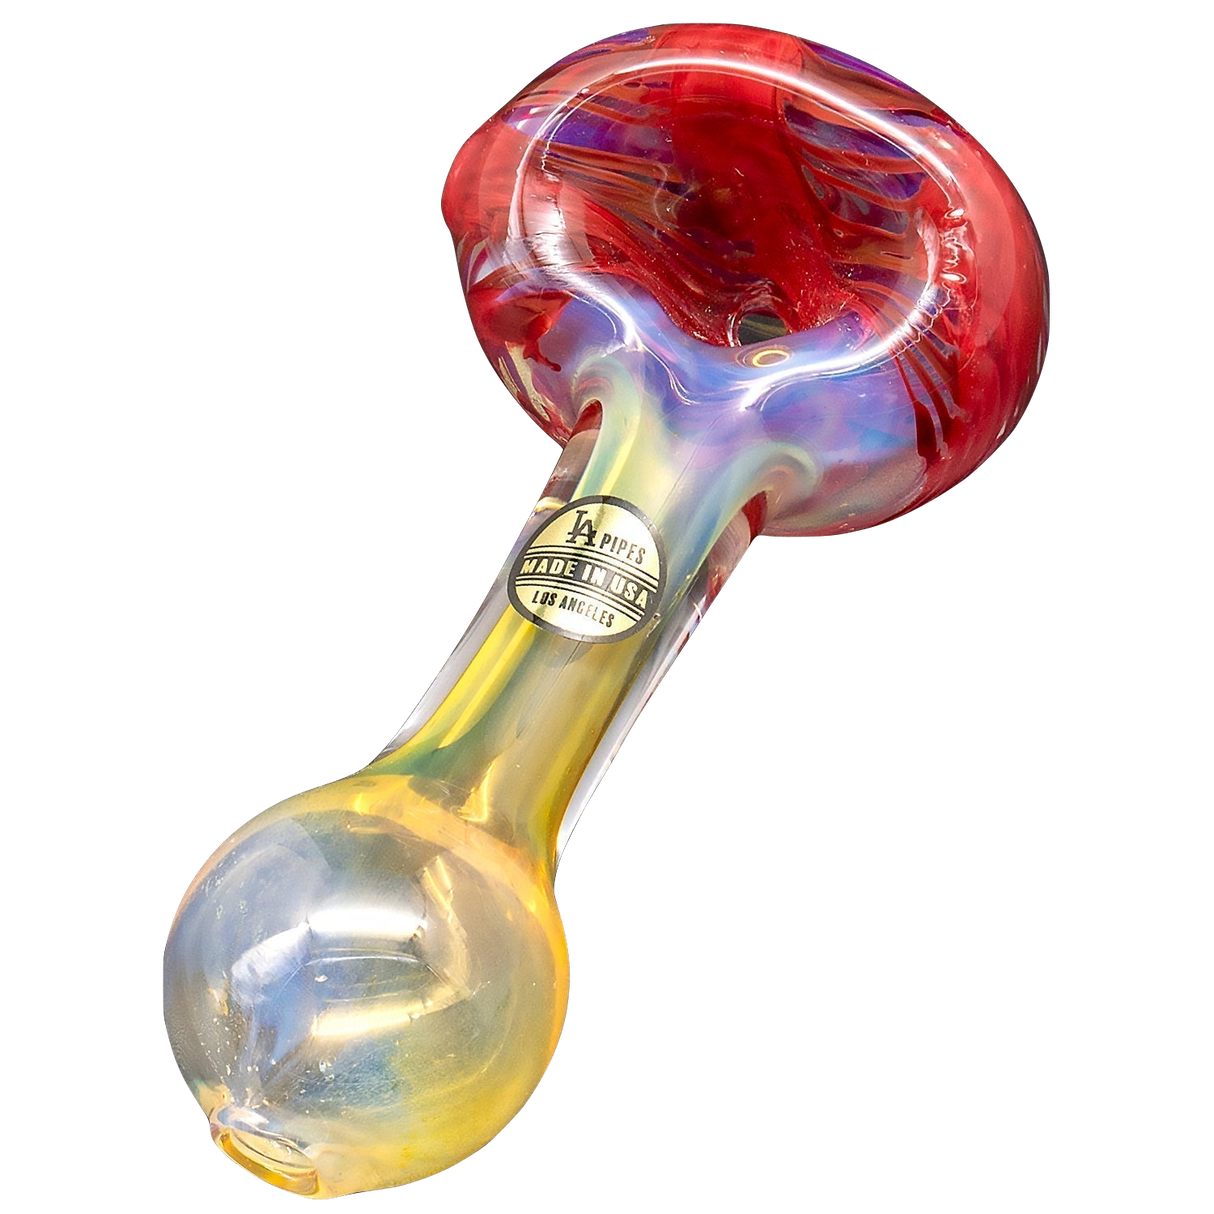 LA Pipes hand-blown borosilicate glass spoon pipe with color changing accents